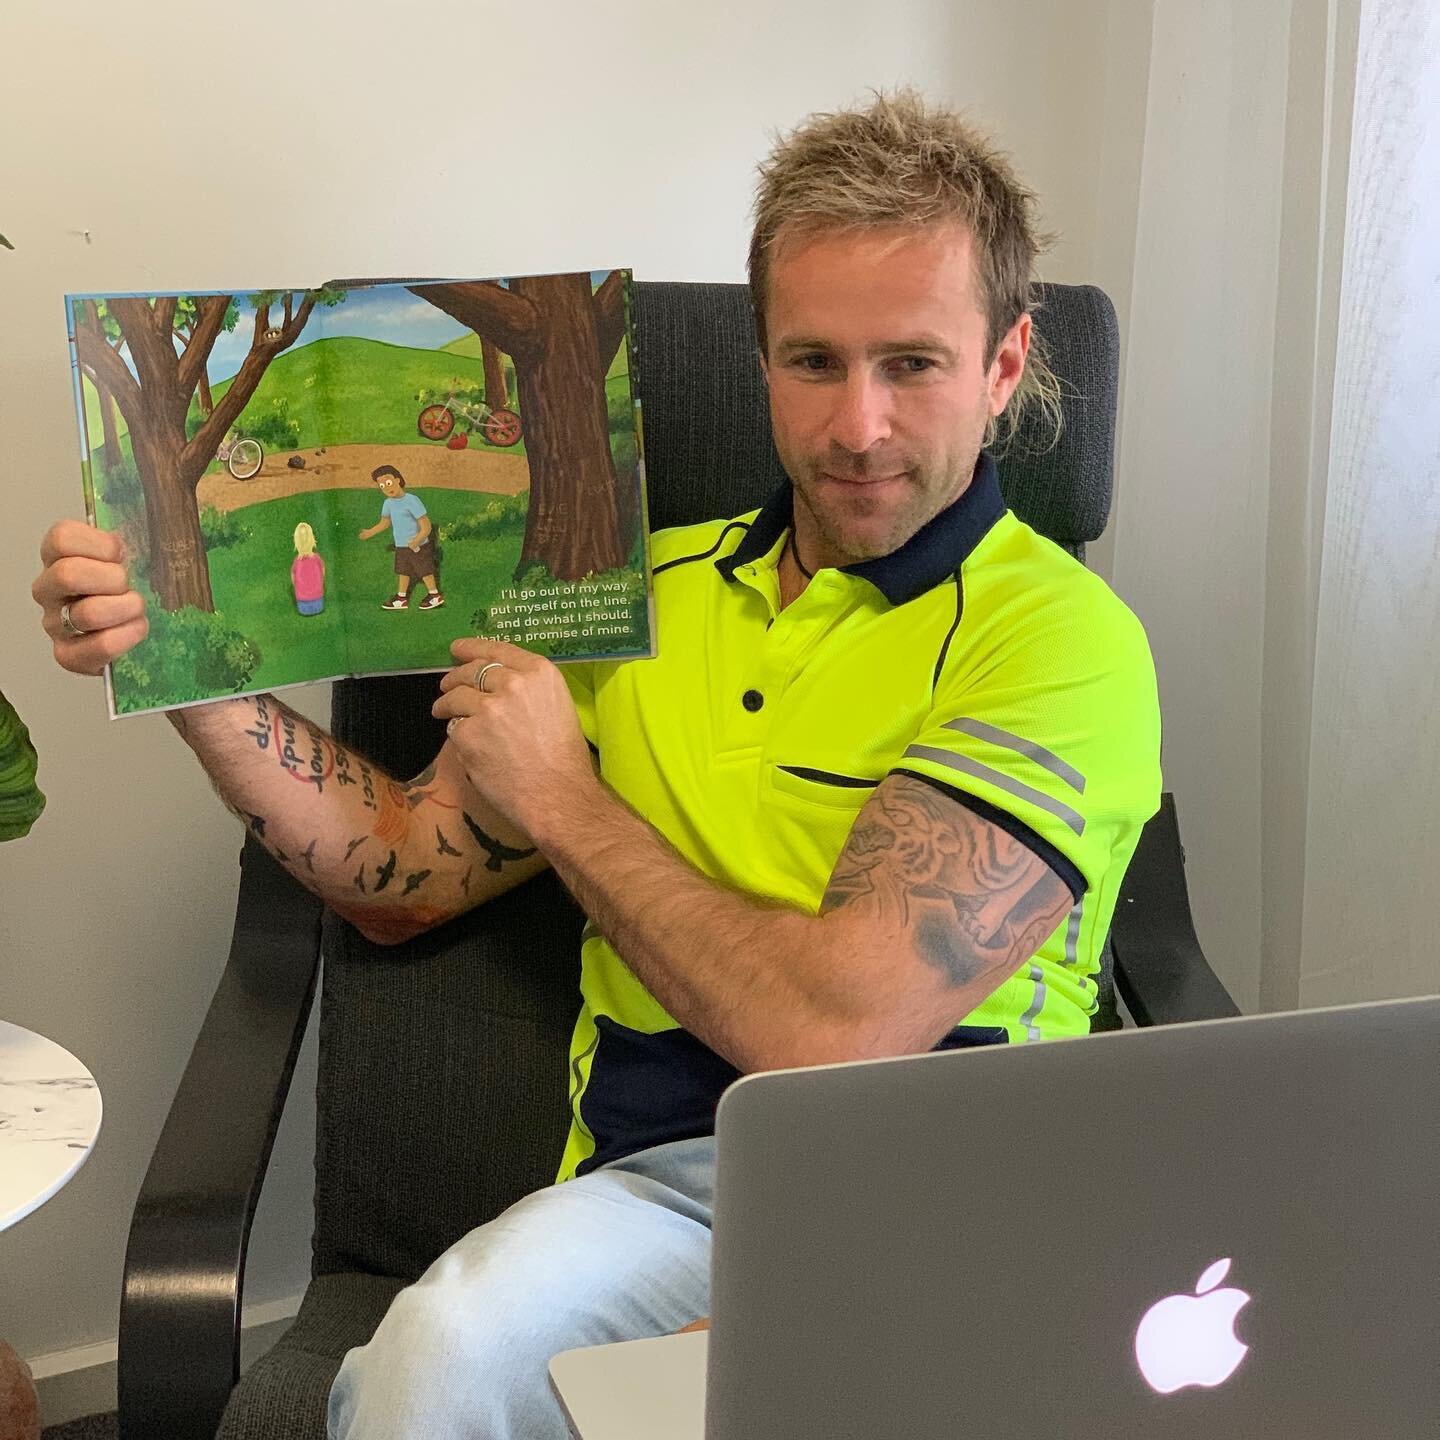 On FRIDAY I had such an FUN time having been GIFTED the OPPORTUNITY to do a LIVE STORY TIME reading to the KIDS of Knox Central Primary School.

It was a bit SPECIAL as it was the FIRST TIME I&rsquo;ve read my children&rsquo;s book A HERO BORN to a g